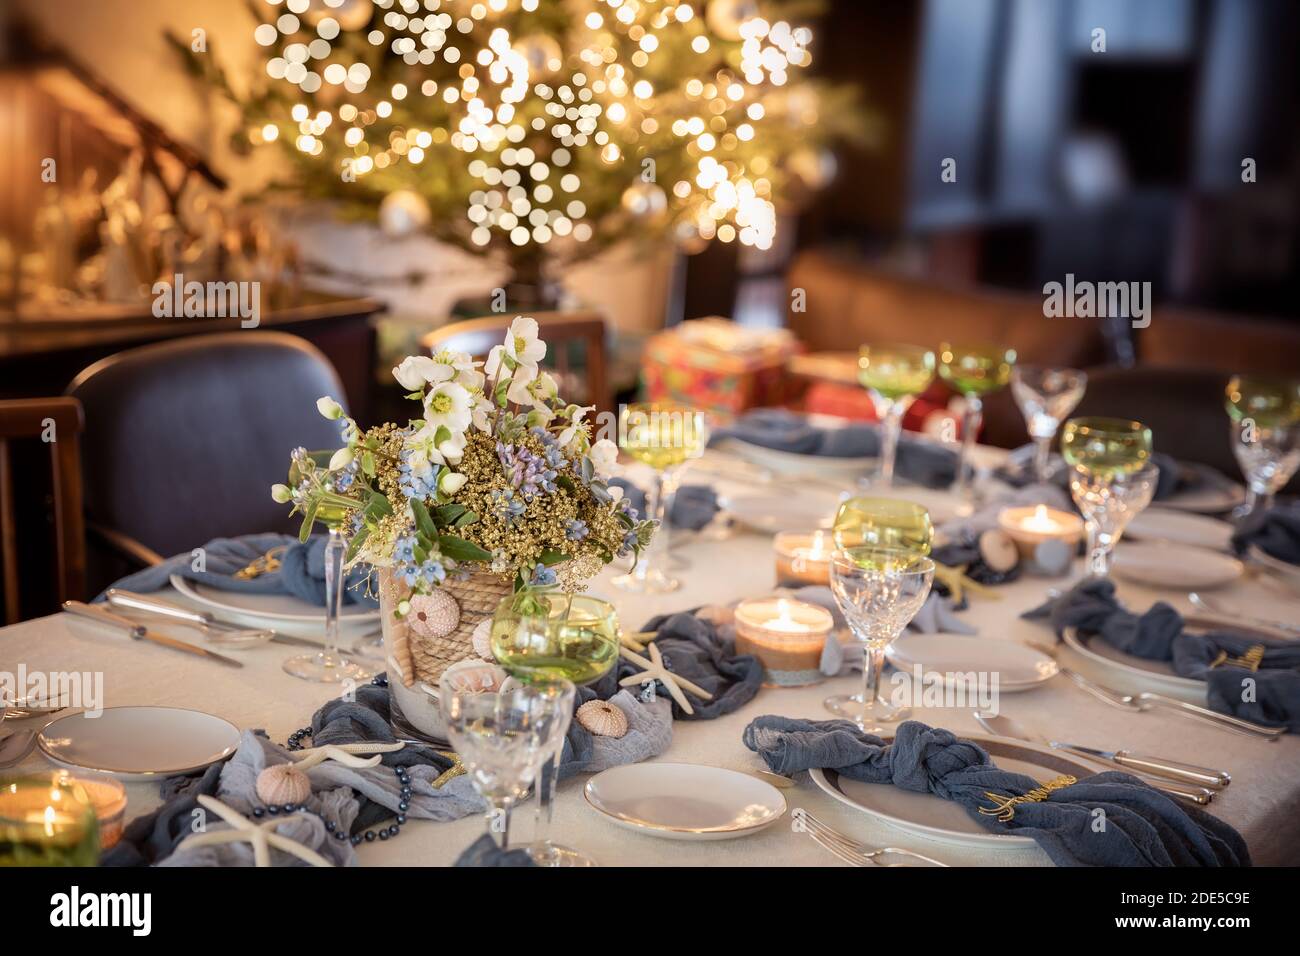 https://c8.alamy.com/comp/2DE5C9E/christmas-dinner-table-decorations-in-blues-and-gold-following-a-beach-theme-with-seashells-and-starfish-2DE5C9E.jpg